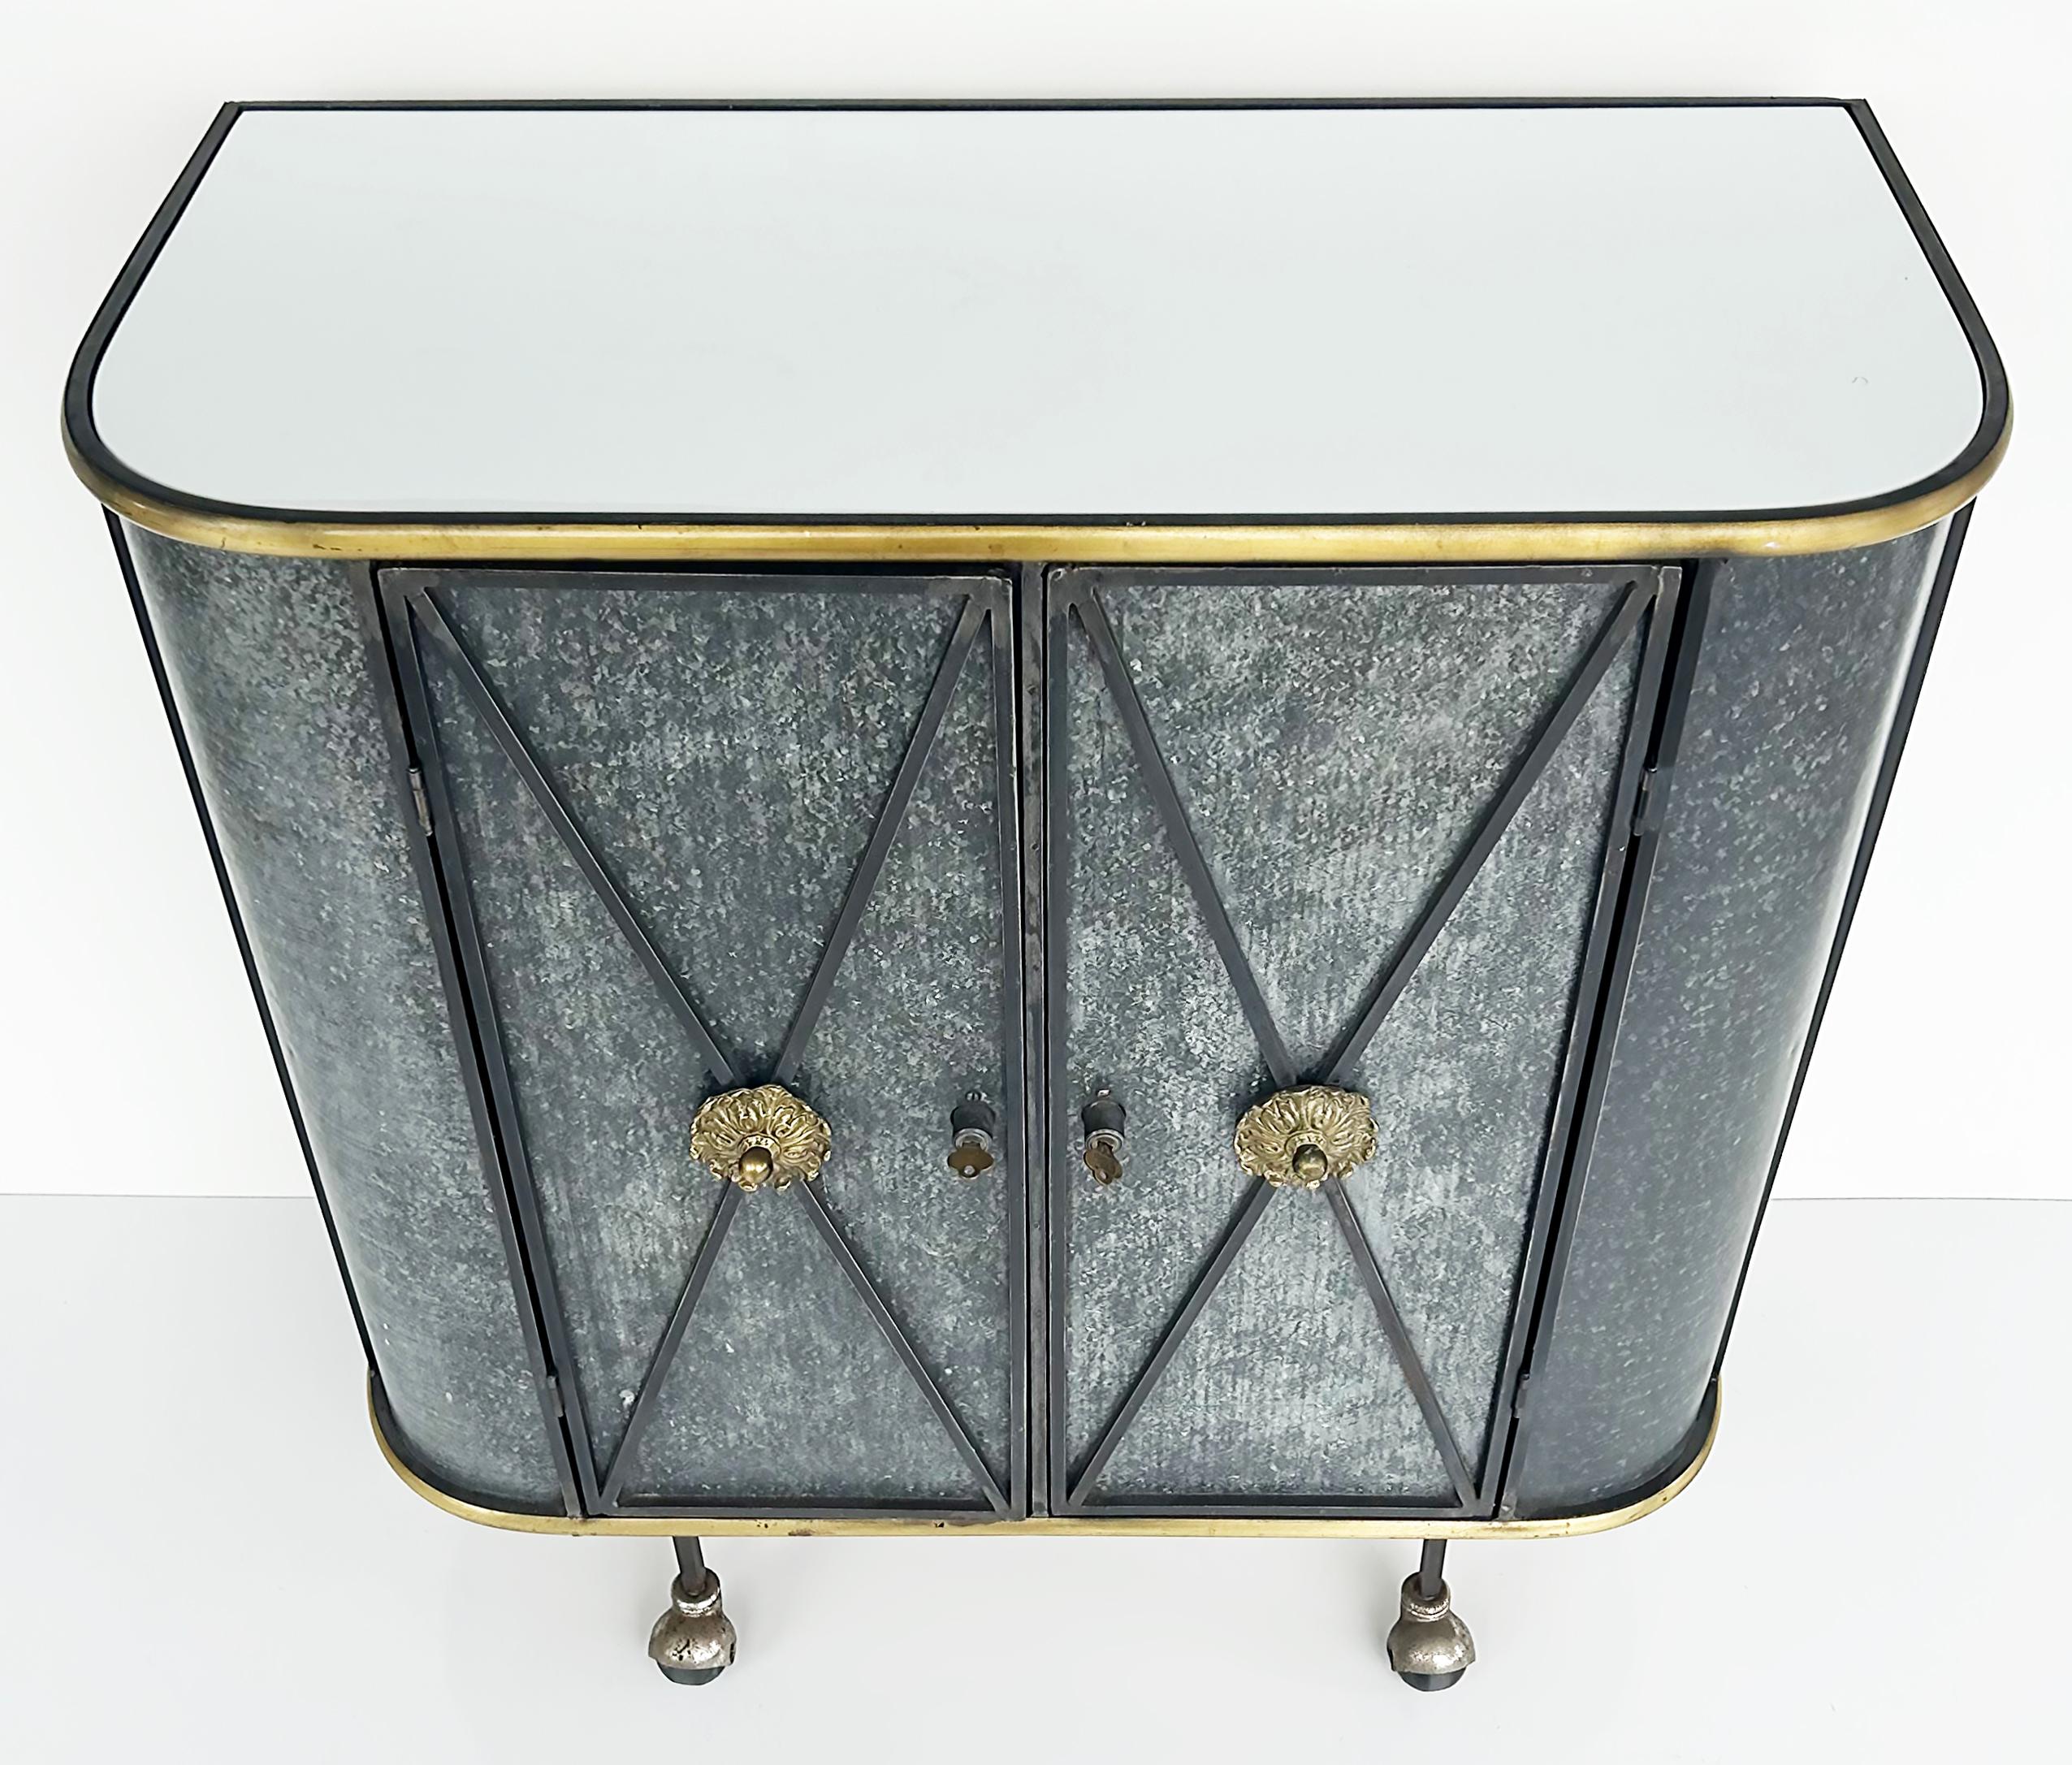 Vintage Neo-classical Iron, Brass, Metal 2-door Cabinet or Dry Bar, Glass Top  For Sale 4